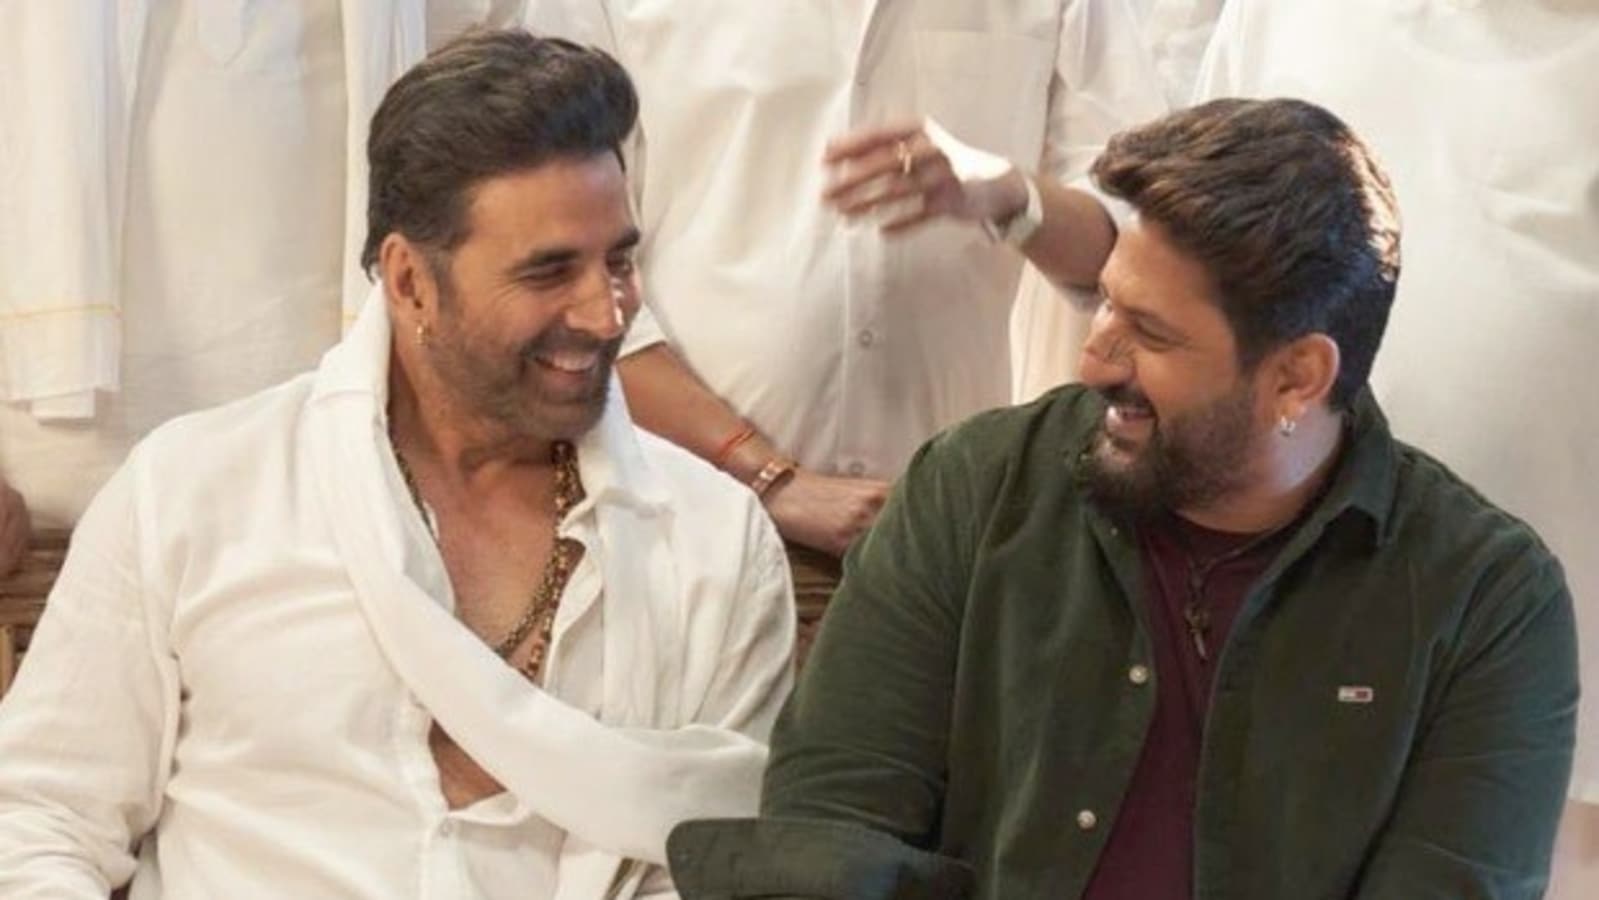 Arshad Warsi corrects journalist who said Bachchhan Paandey is a box office success: ‘Don’t lie’